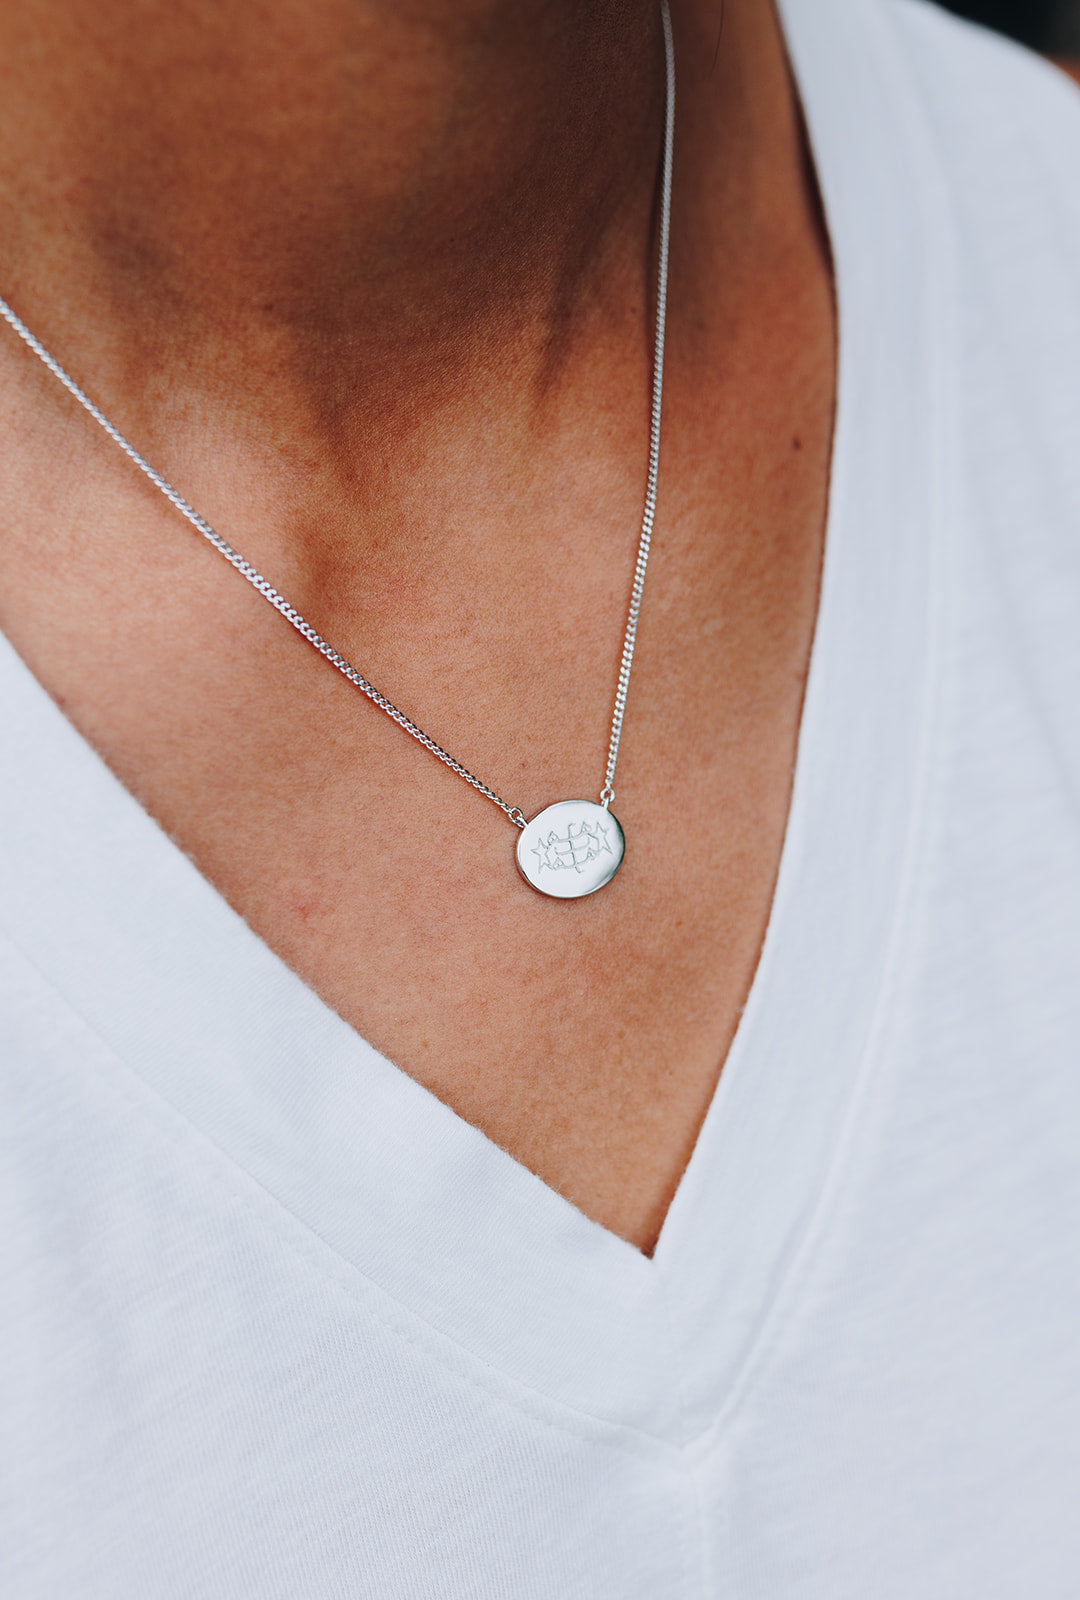 simple silver oval Bahai pendant necklace with ringstone symbol